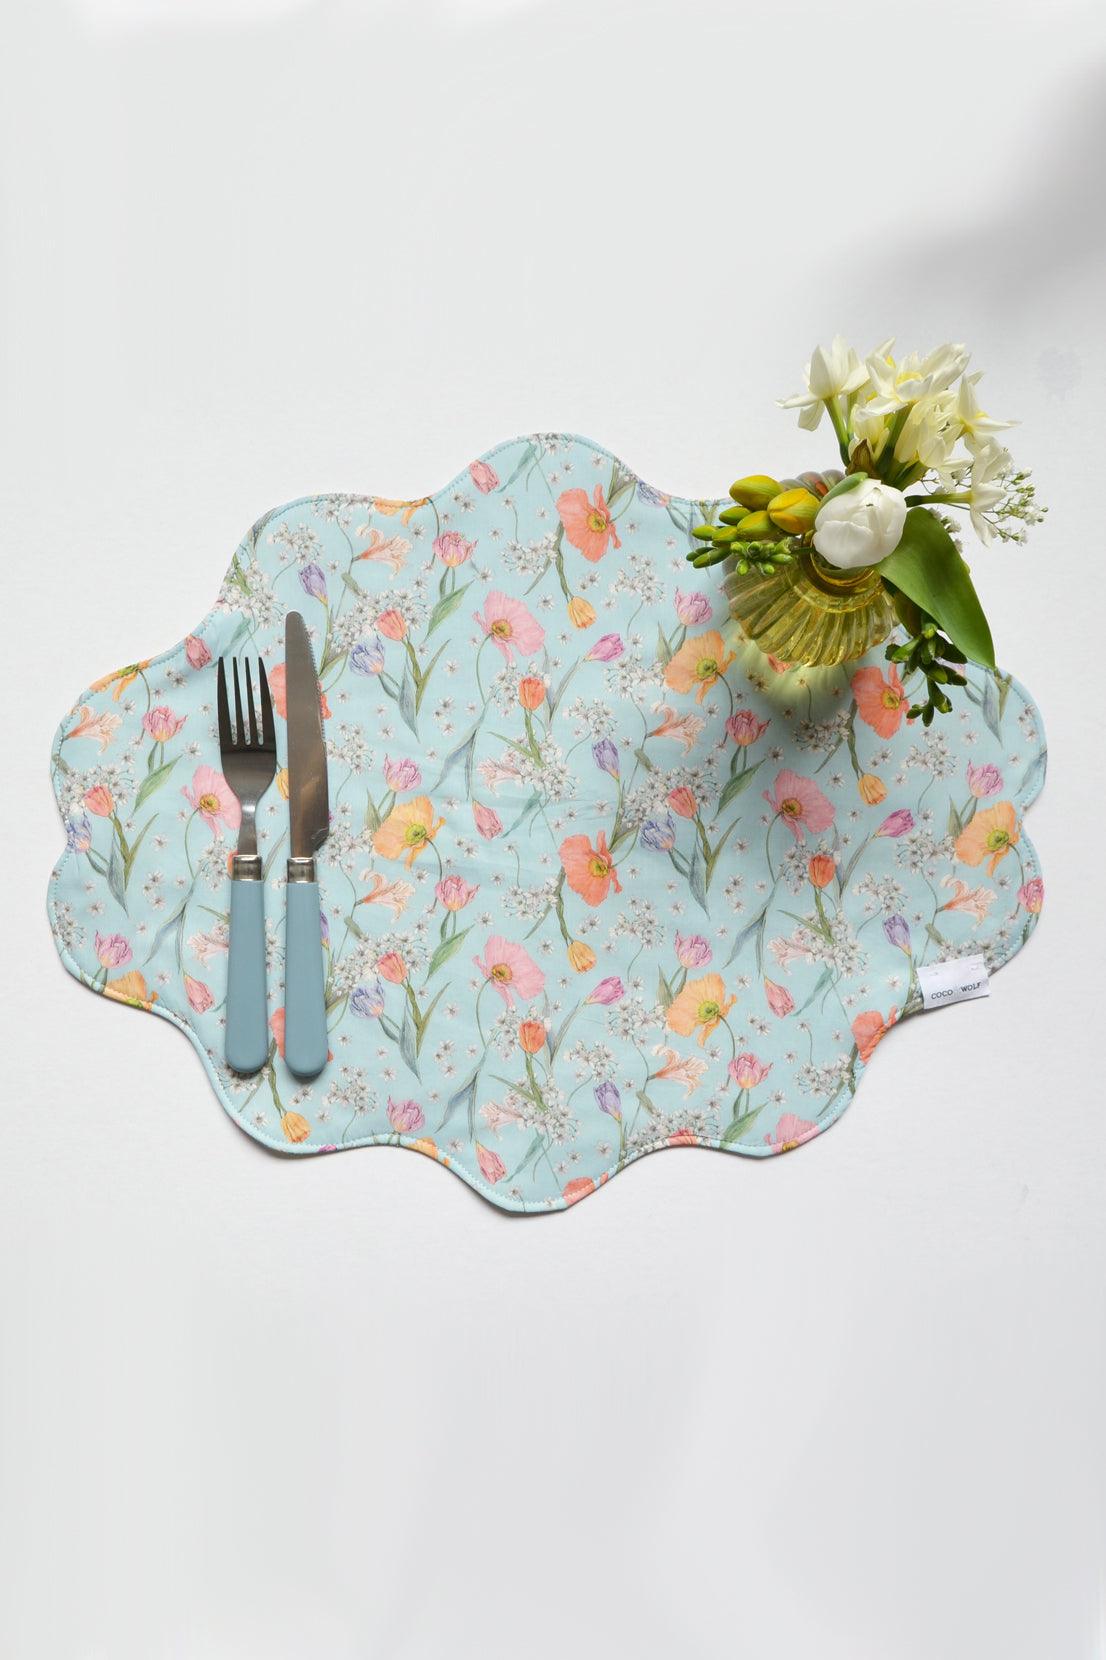 Reversible Wavy Placemat made with Liberty Fabric SPRING BLOOMS & MEADOWLAND - Coco & Wolf